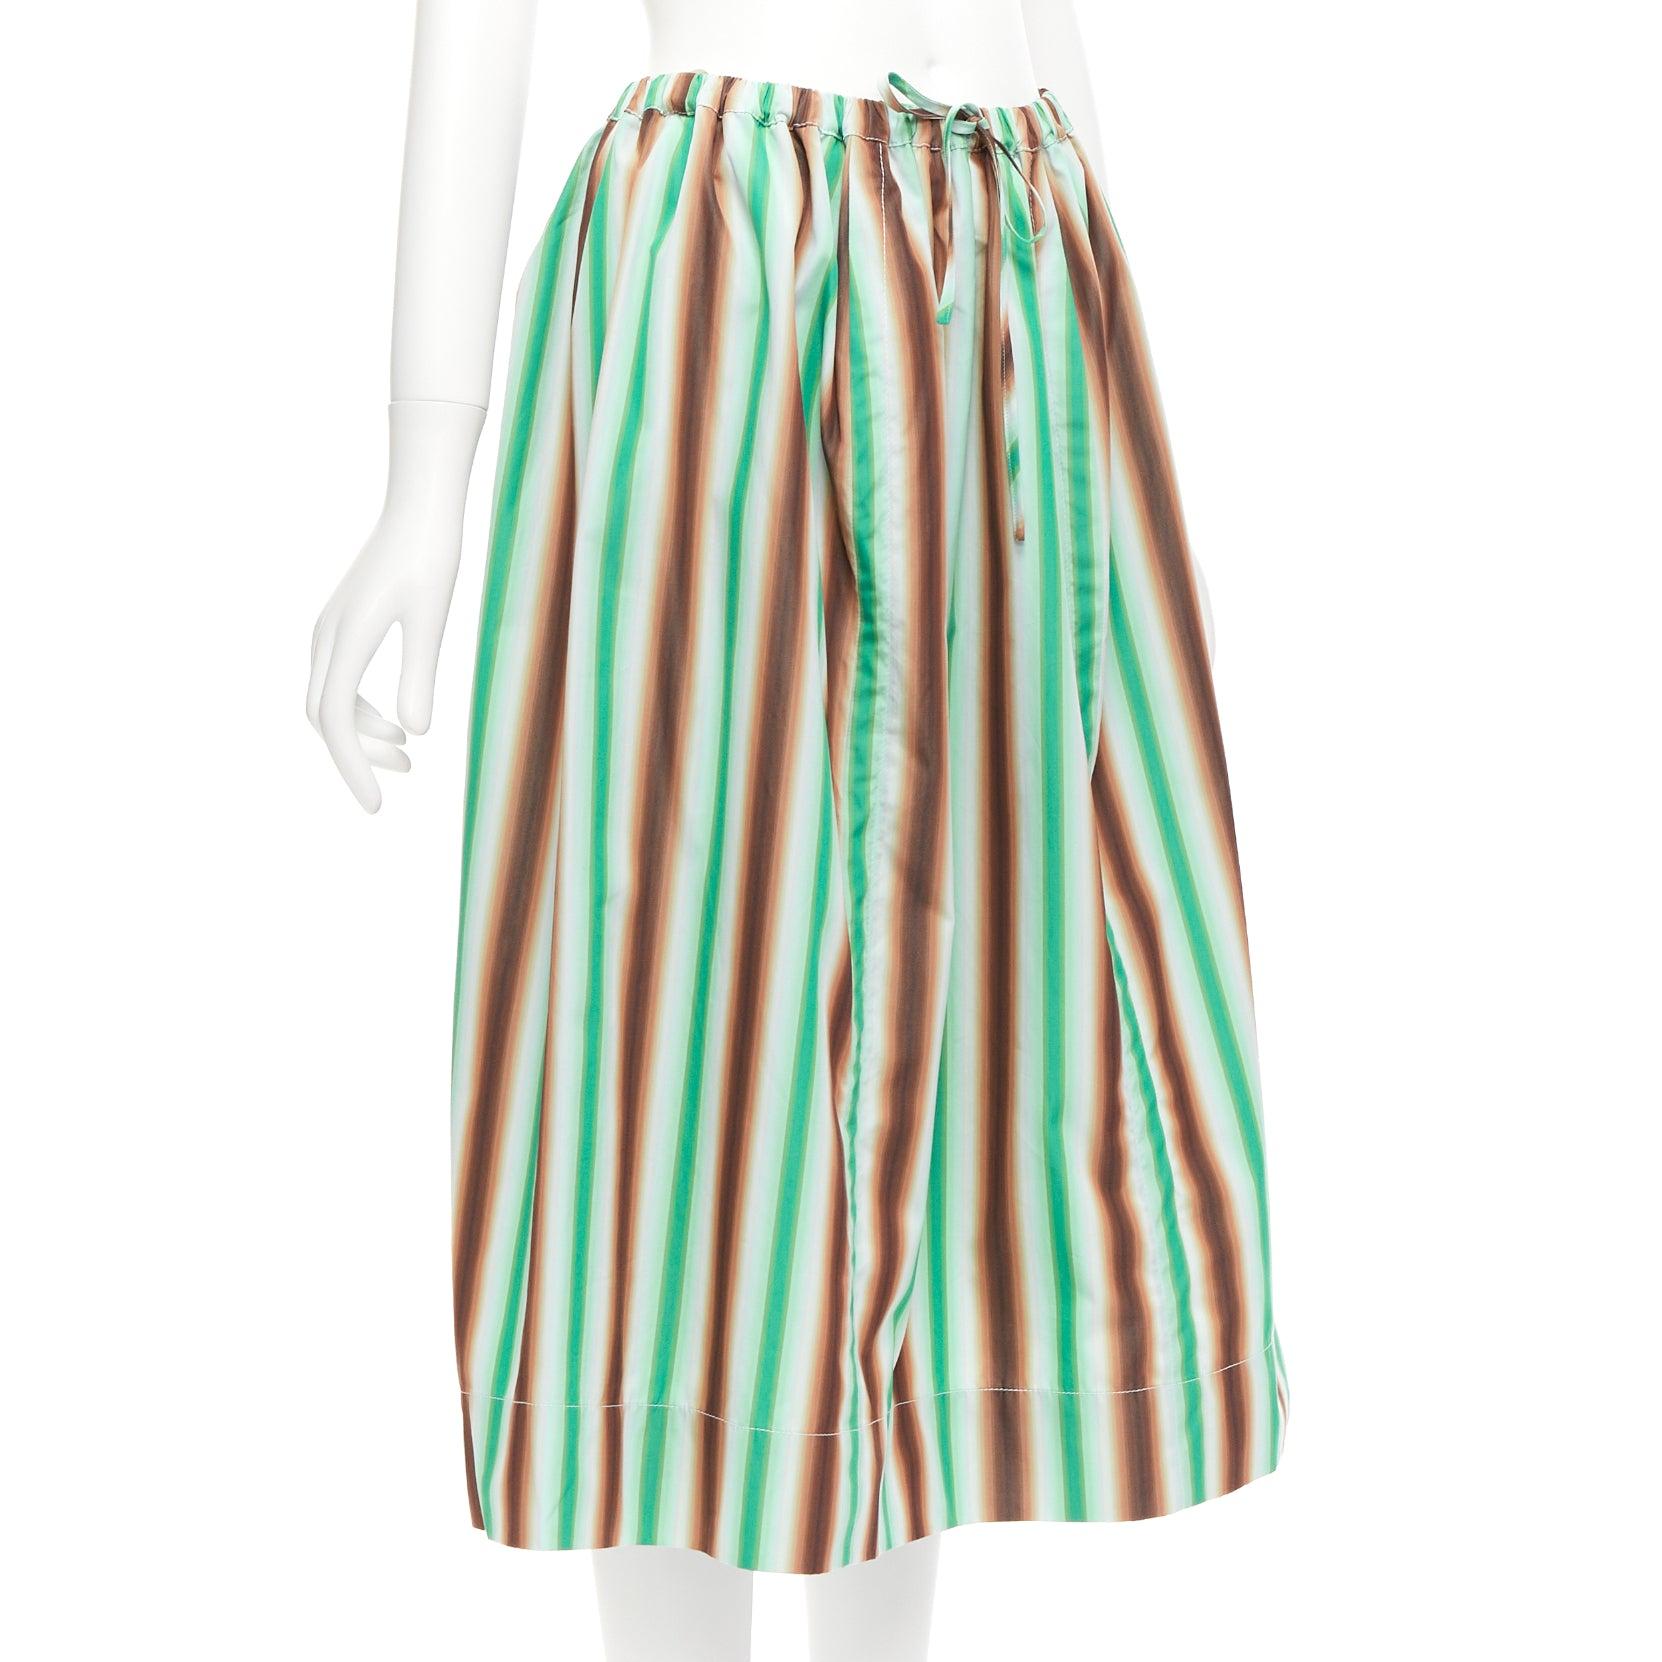 MARNI graphic green brown white striped cotton midi parachute skirt IT38 XS
Reference: CELG/A00270
Brand: Marni
Material: Cotton
Color: Green, Brown
Pattern: Striped
Closure: Drawstring
Extra Details: Lightweight cotton poplin stripe skirt a with